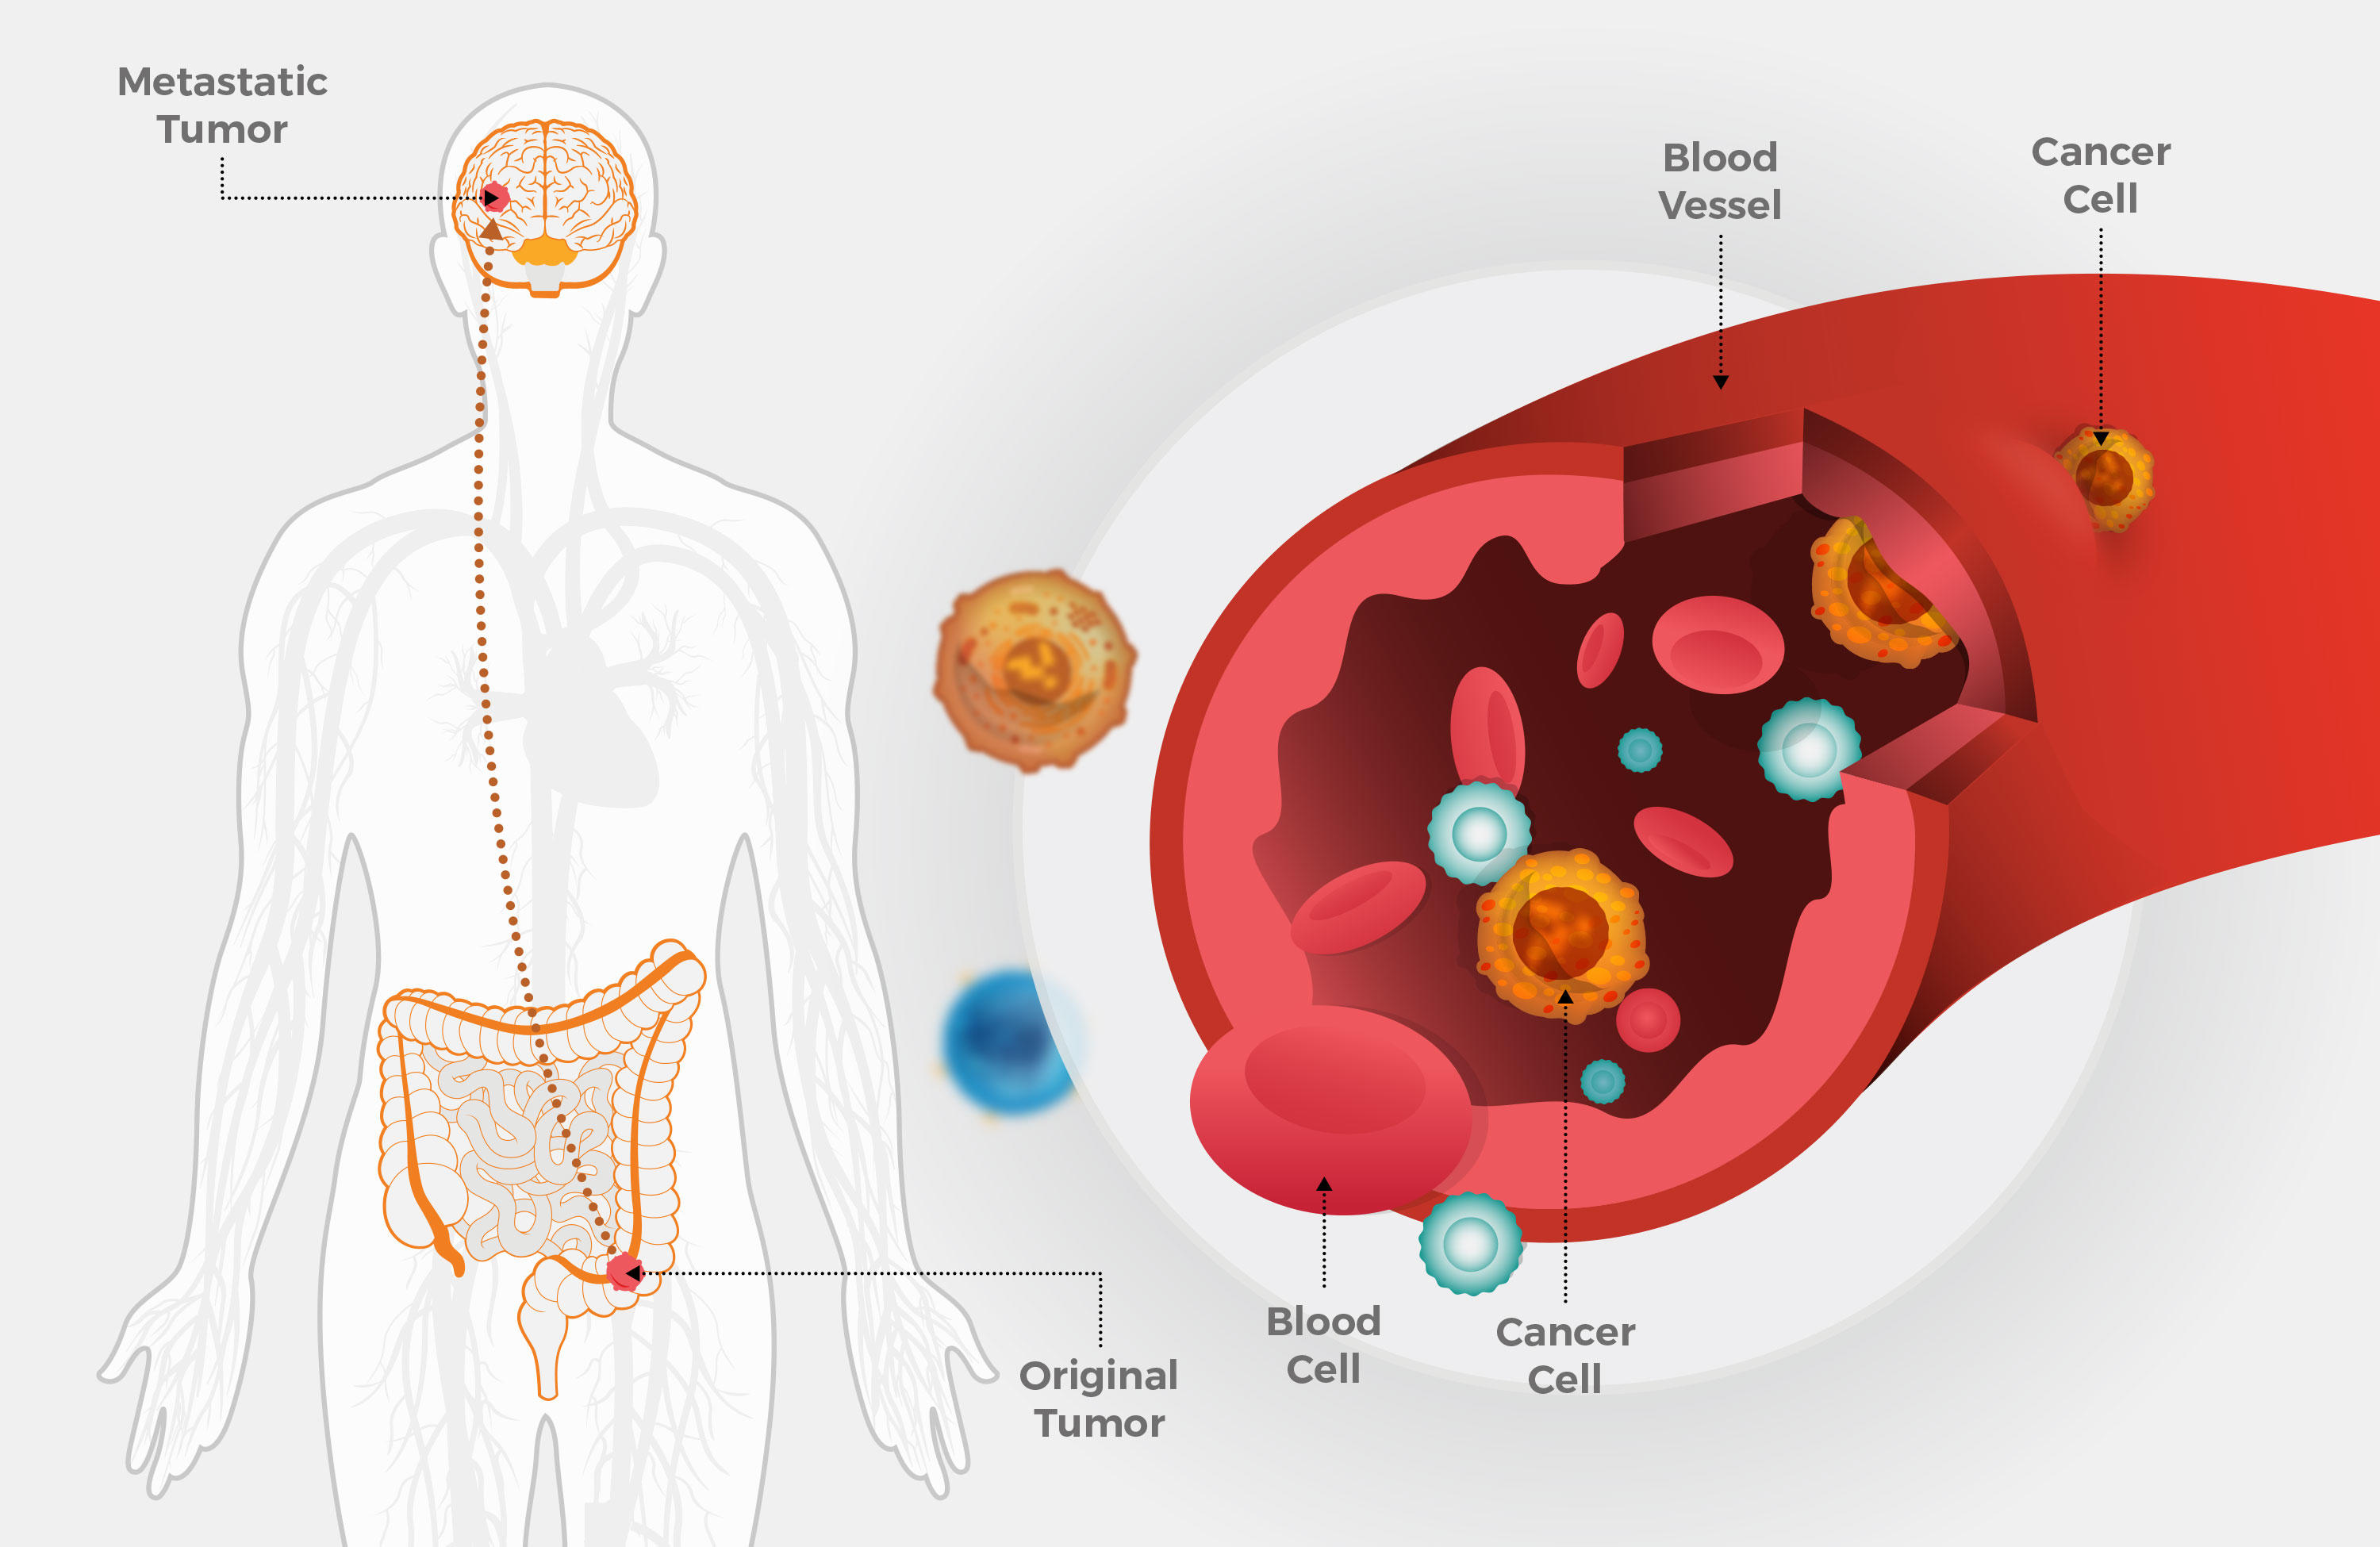 Metastatic cancer of the colon survival rate, - Metastatic cancer from colon to liver